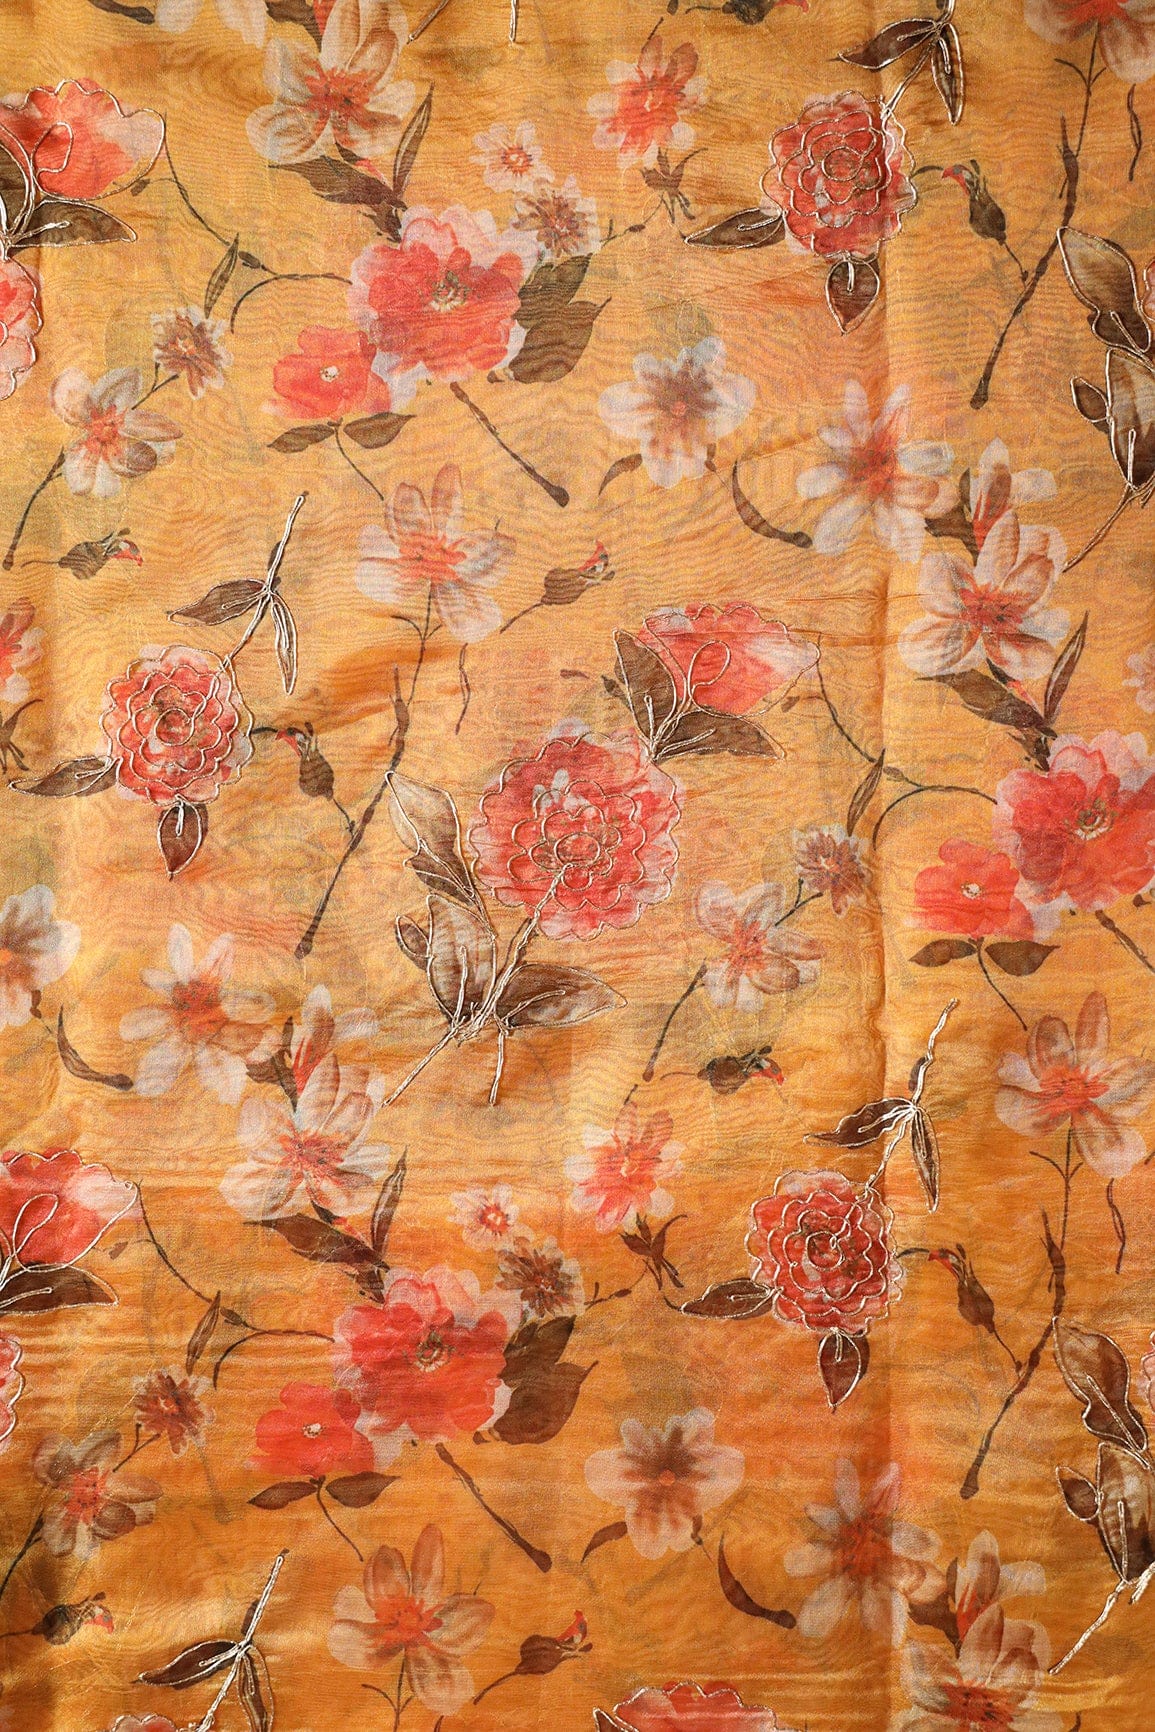 doeraa Embroidery Fabrics Red And Brown Floral Digital Print With Gold Zari Work On Mustard Yellow Organza Fabric